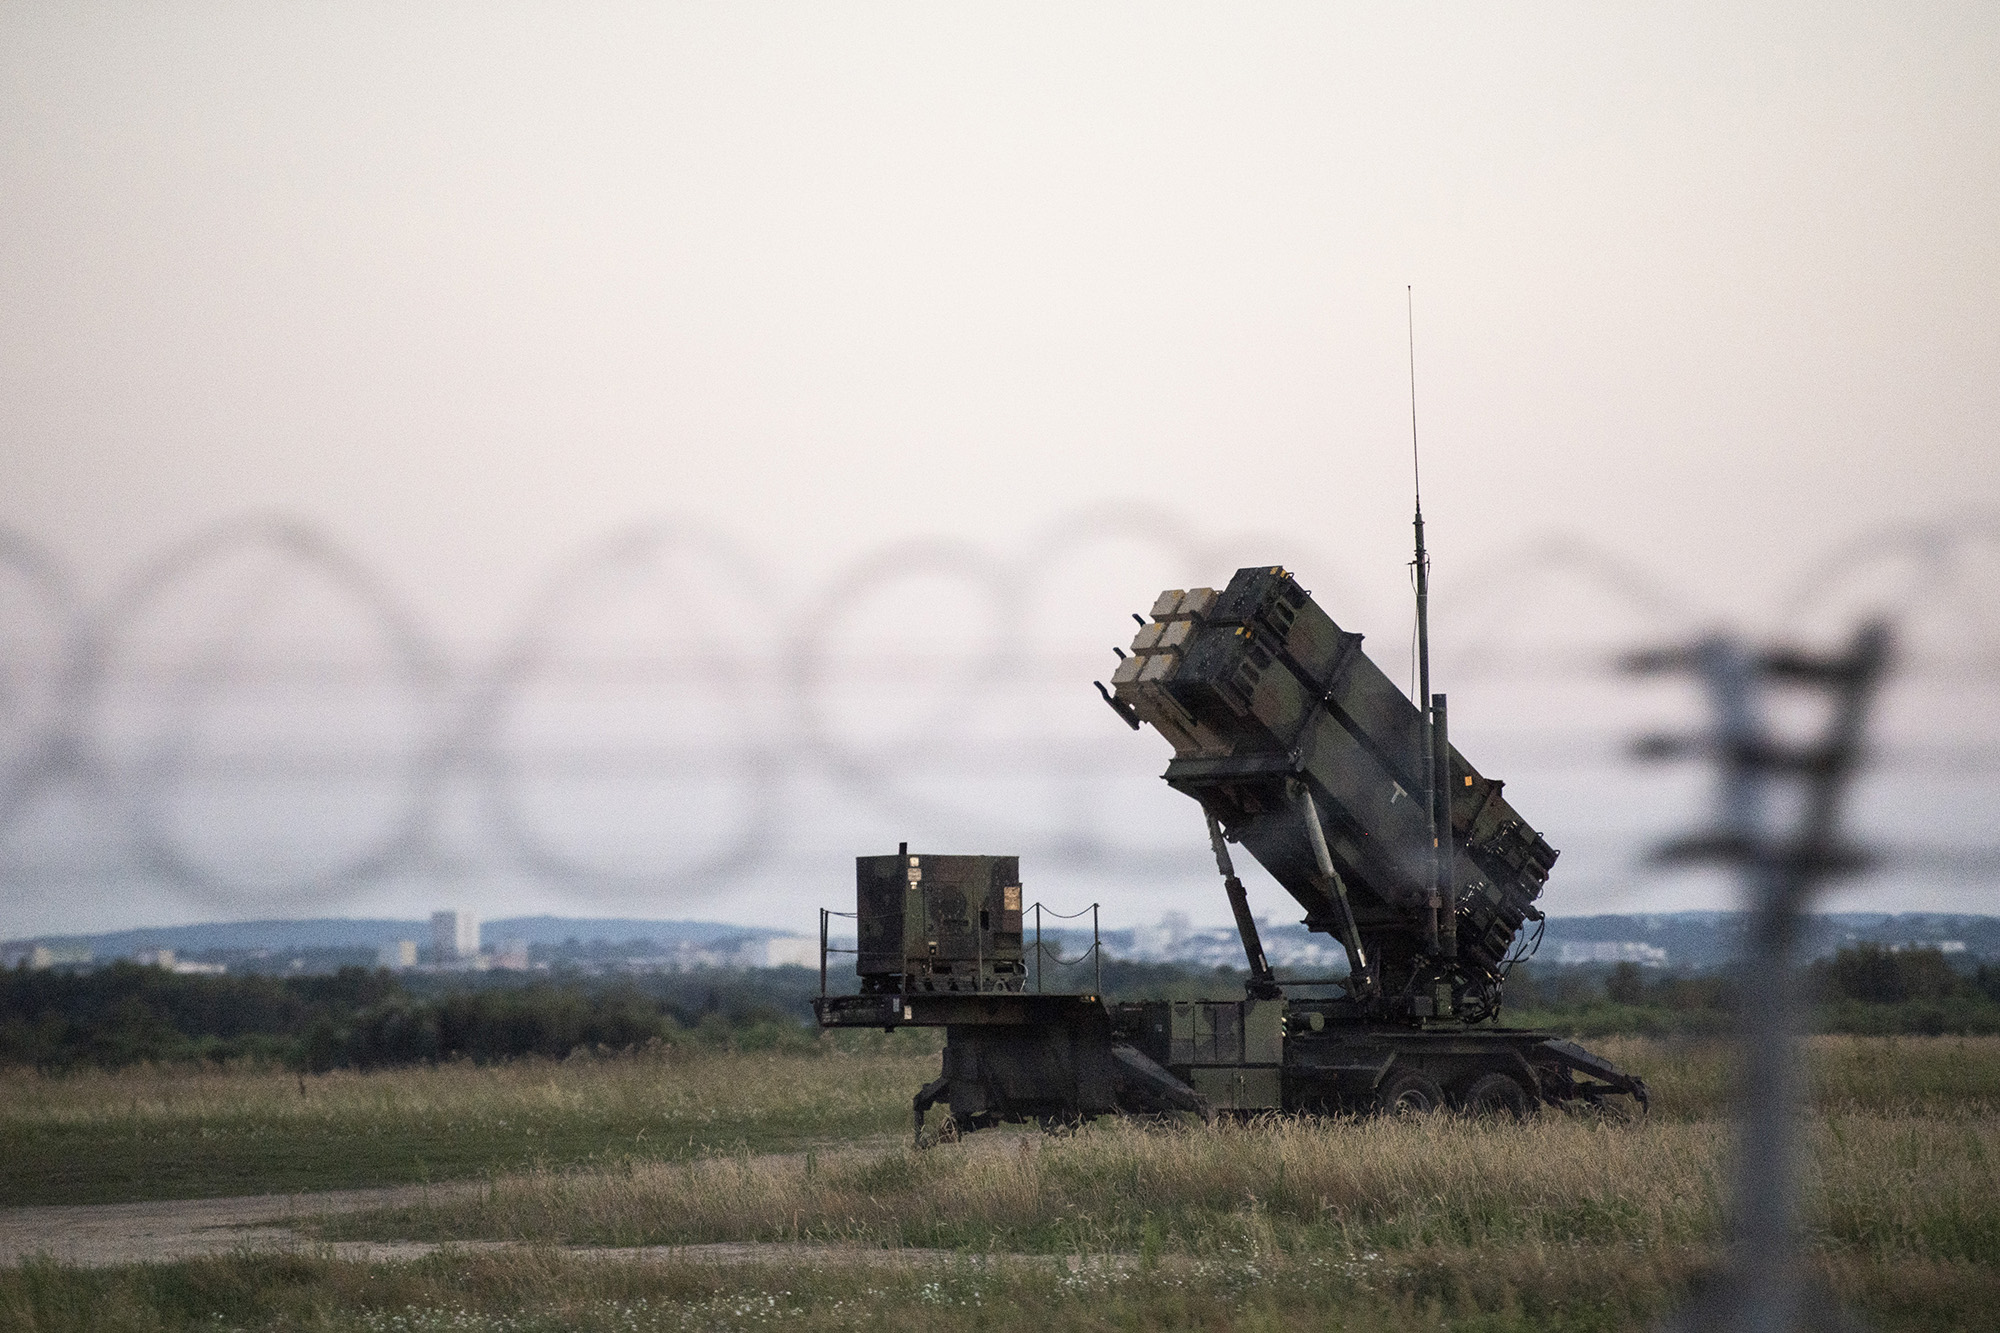 MIM-104 Patriot short-range anti-aircraft missile systems for defense against aircraft, cruise missiles and medium-range tactical ballistic missiles are located at Rzeszow Airport, Poland on July 24.